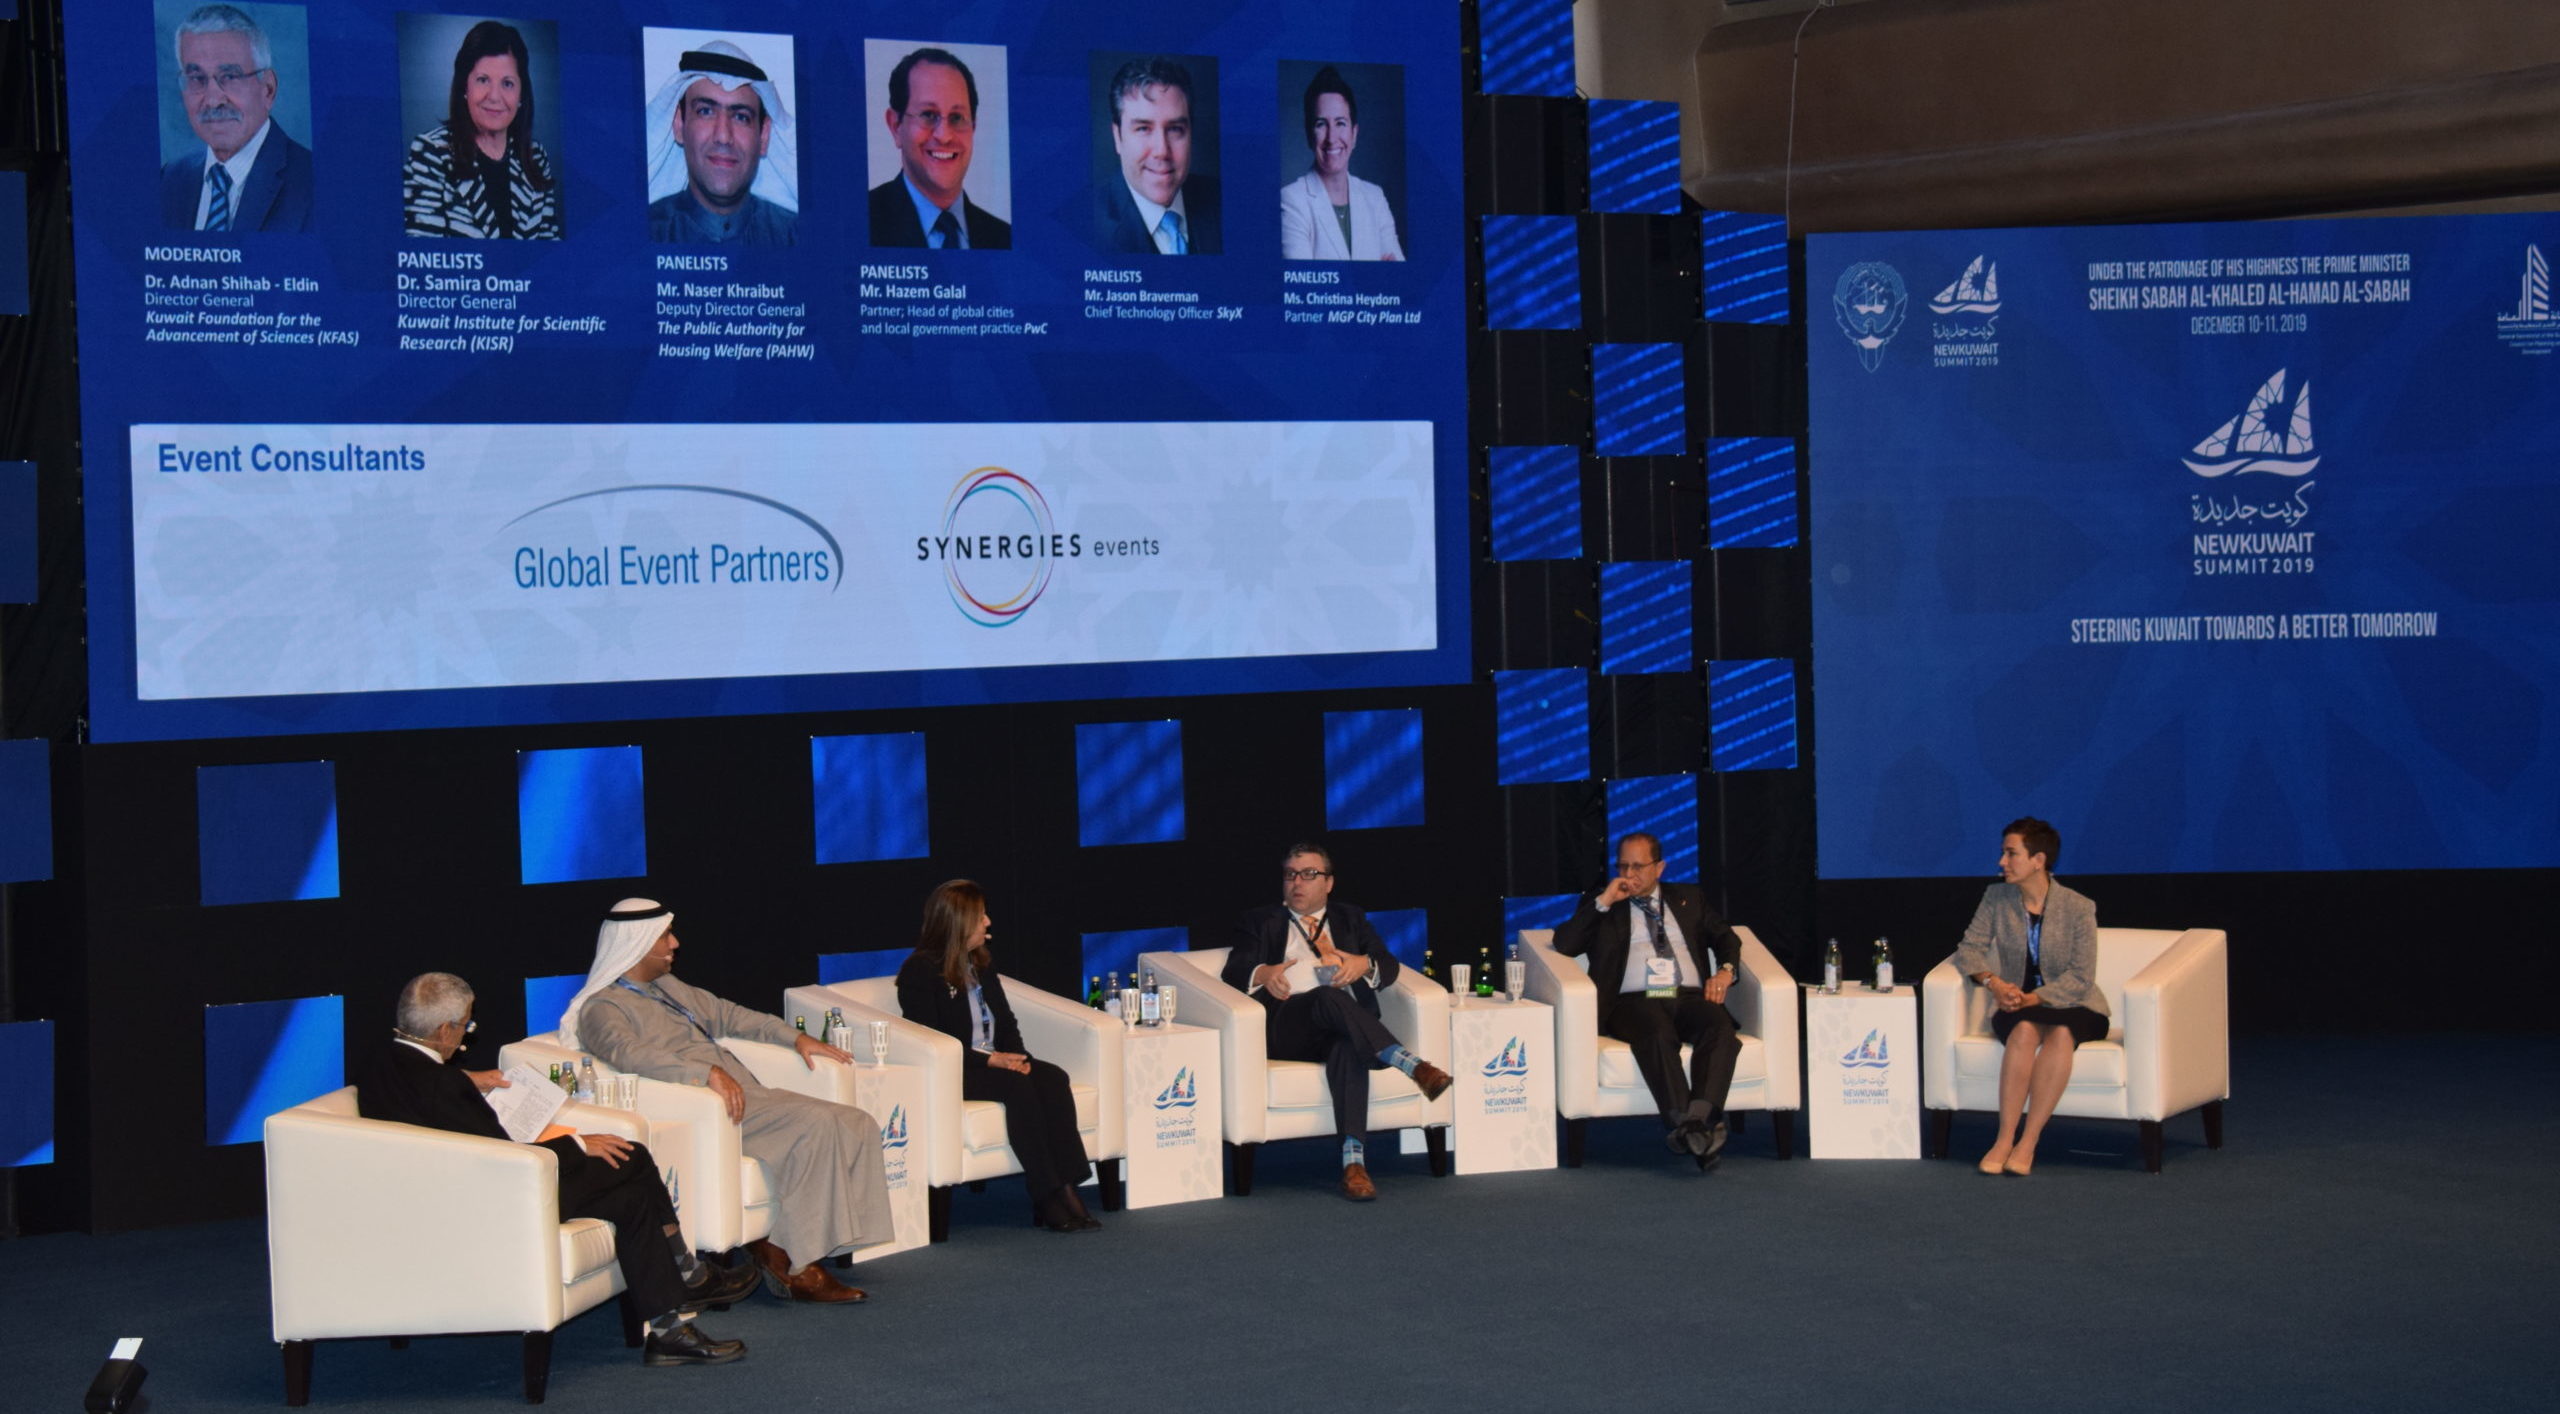 Panelists, including MGP City Plan's Christina Heydorn, discussing Kuwait's urban environment now and in the future.